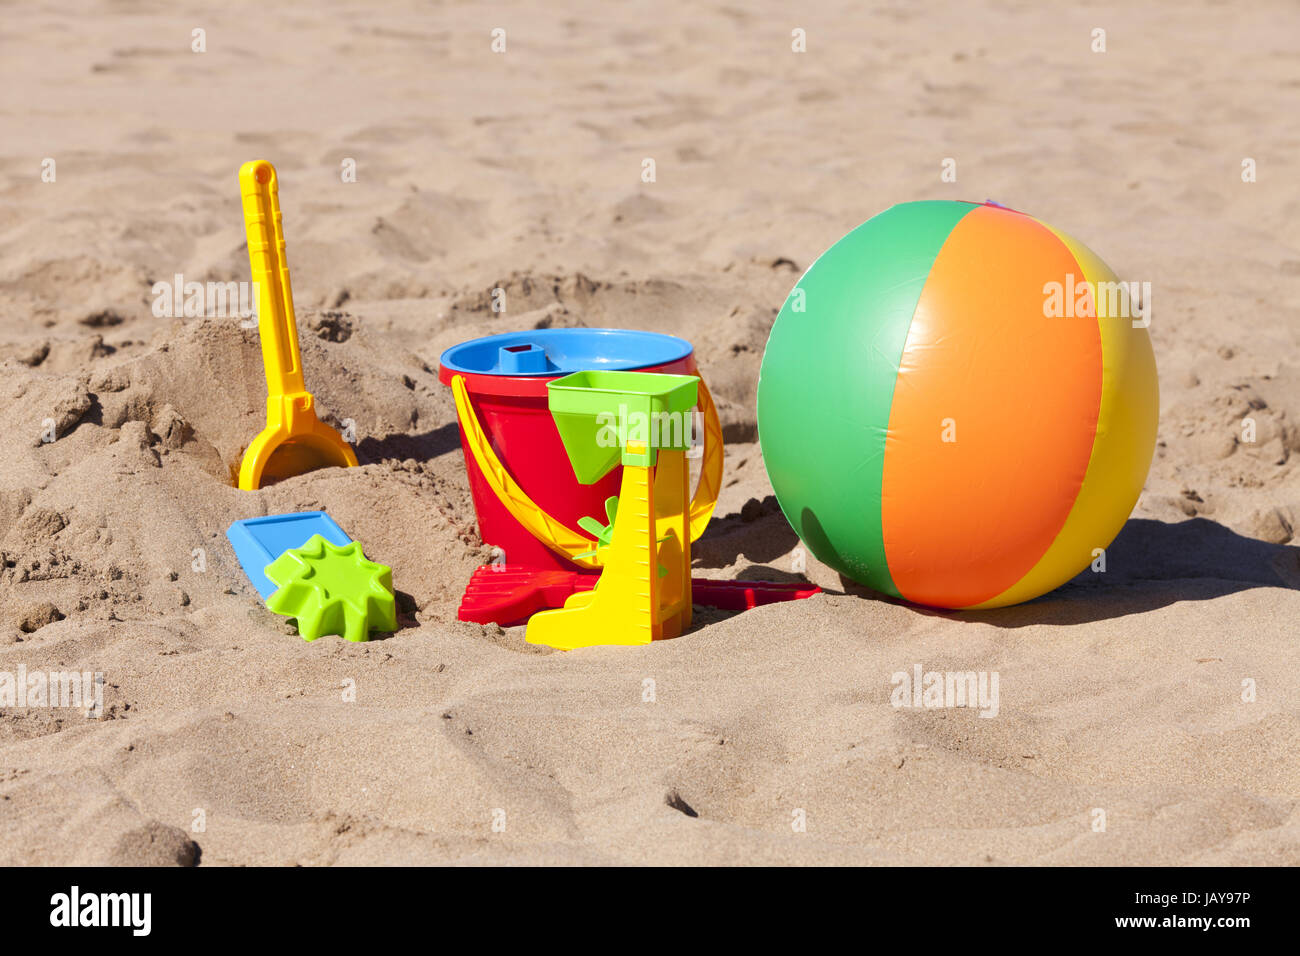 Wasserball High Resolution Stock Photography and Images - Alamy